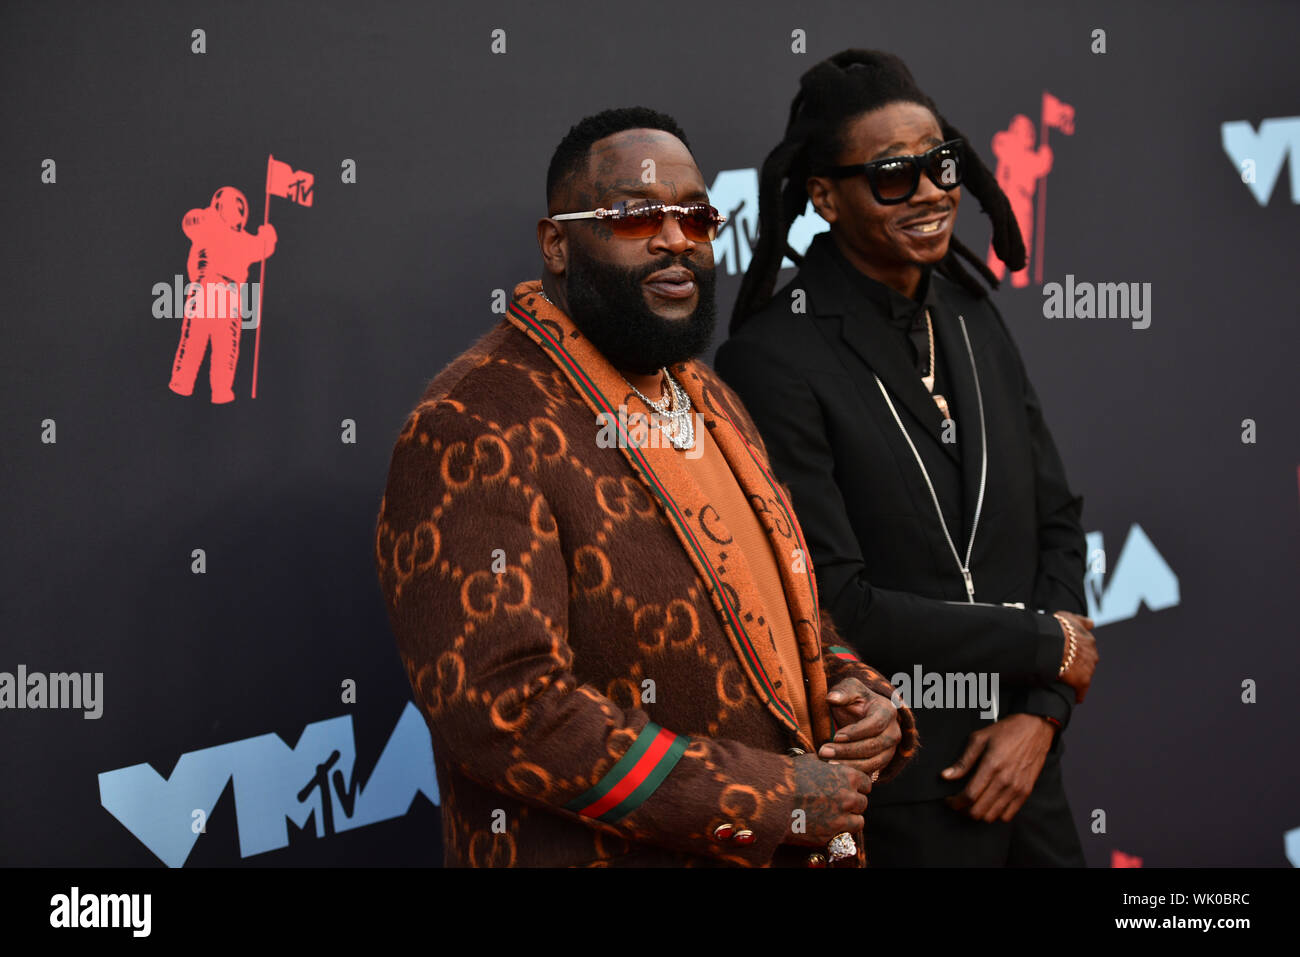 Rick Ross attends the 2019 MTV Video Music Awards at Prudential Center on August 26, 2019 in Newark, New Jersey. Stock Photo